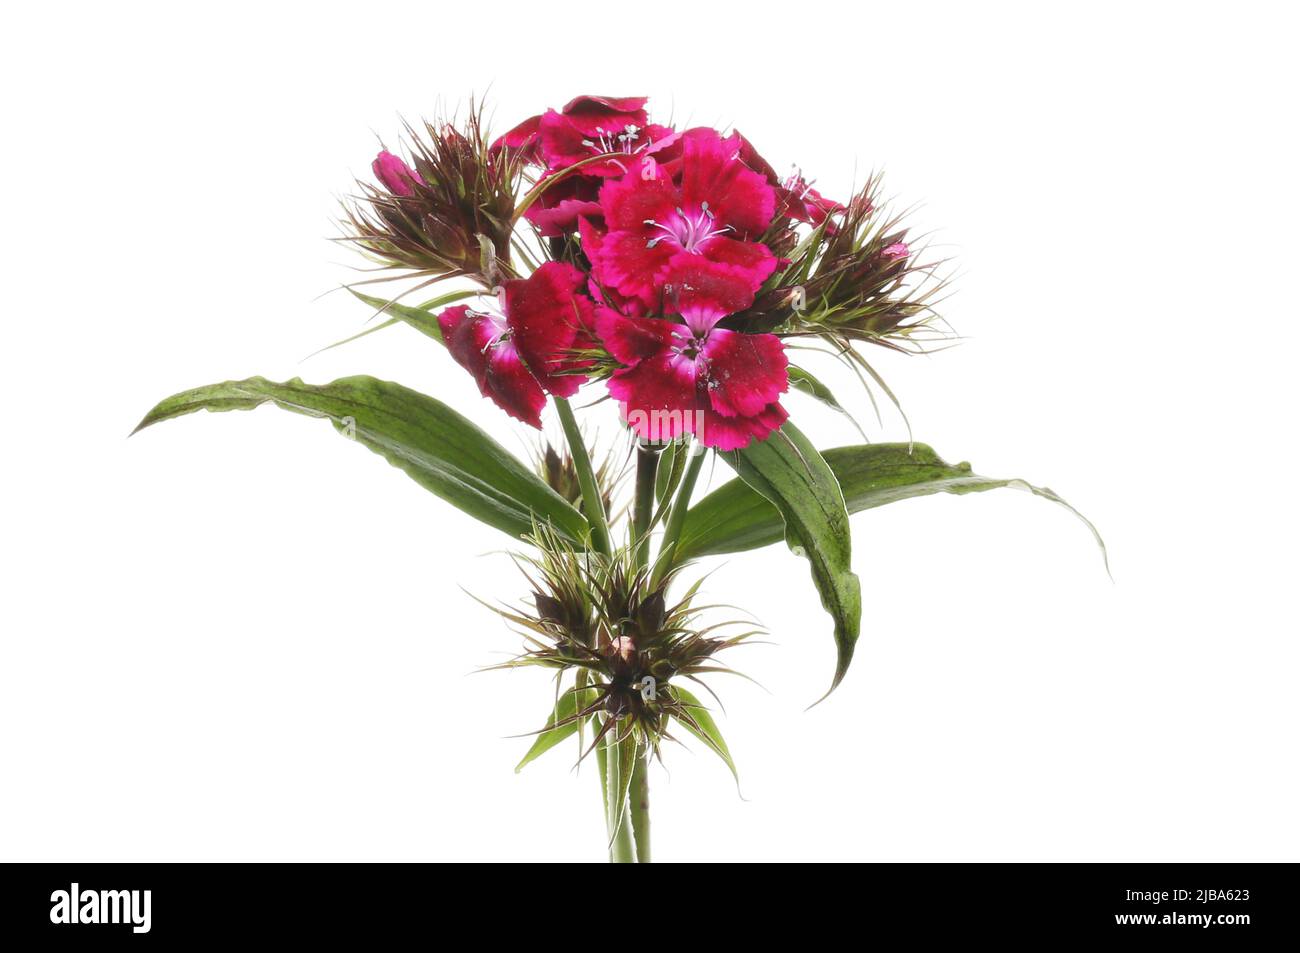 Sweet william flowers and foliage isolated against white Stock Photo